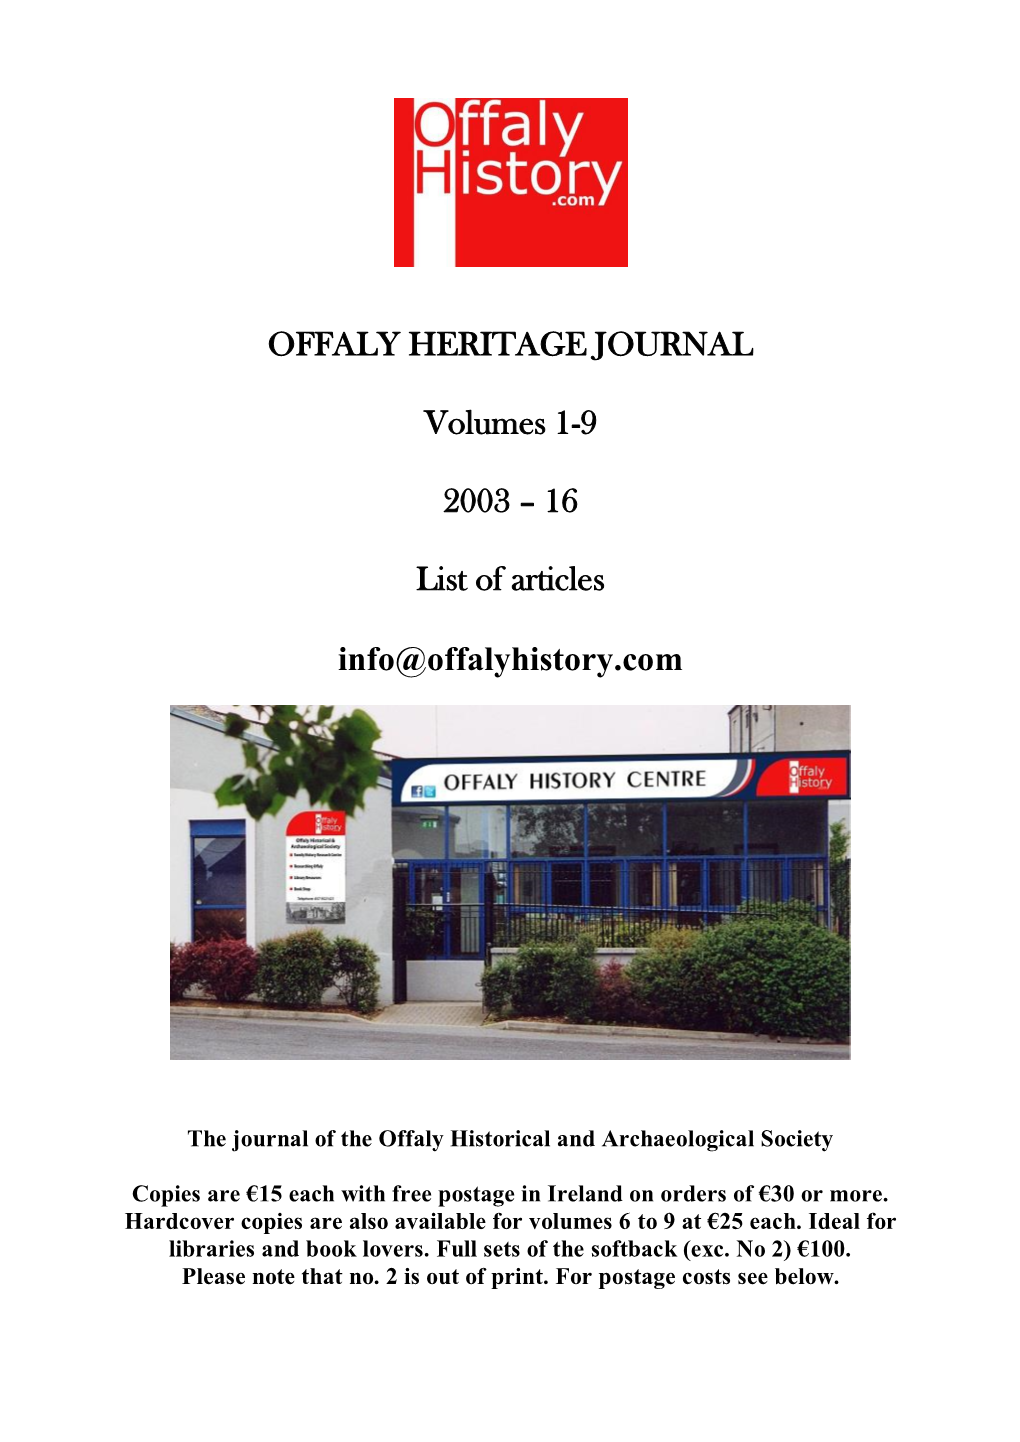 OFFALY HERITAGE JOURNAL Volumes 1-9 2003